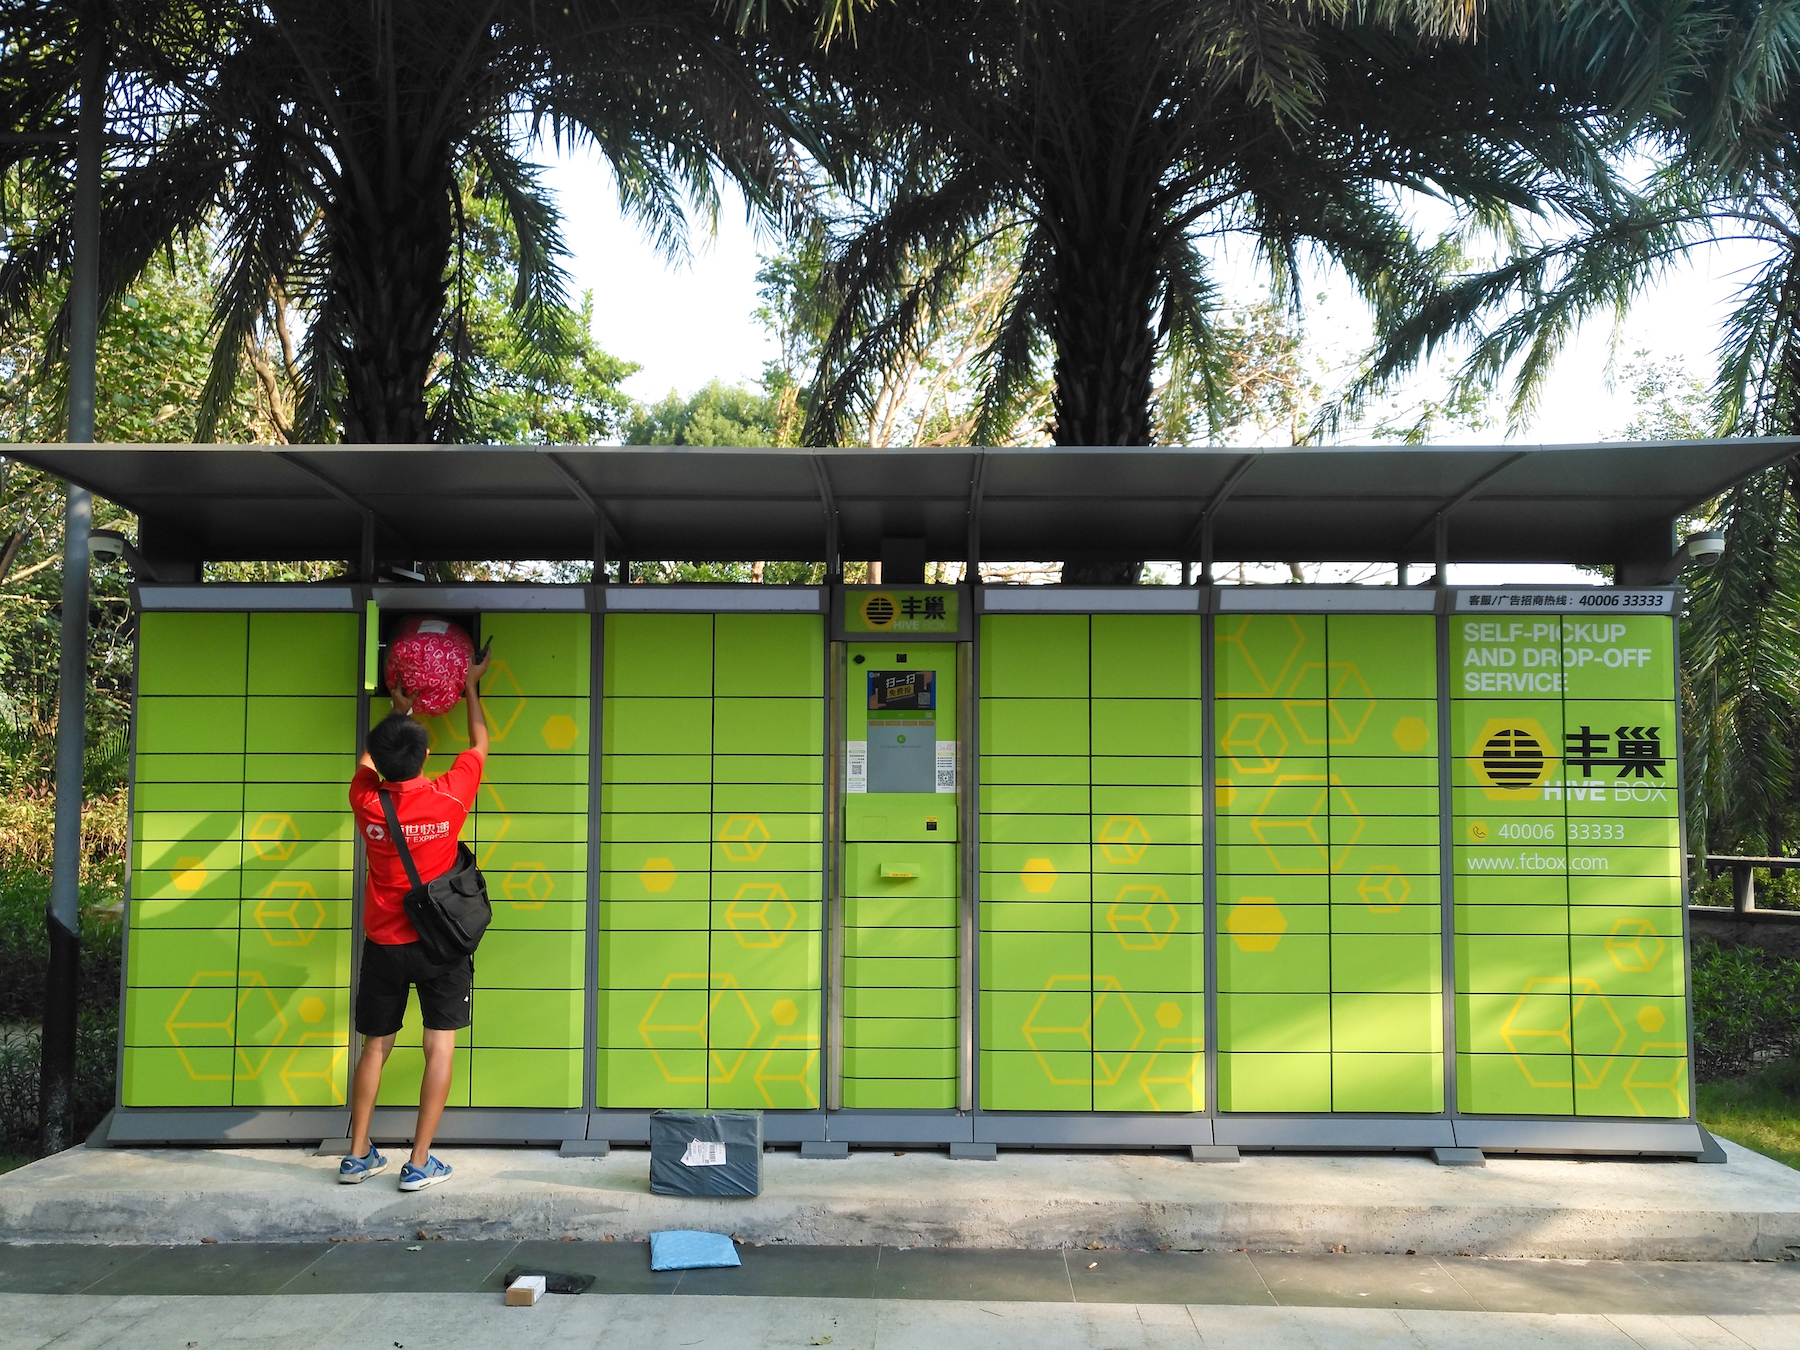 A courier delivers a package to a pick-up locker where the recipient can retrieve it